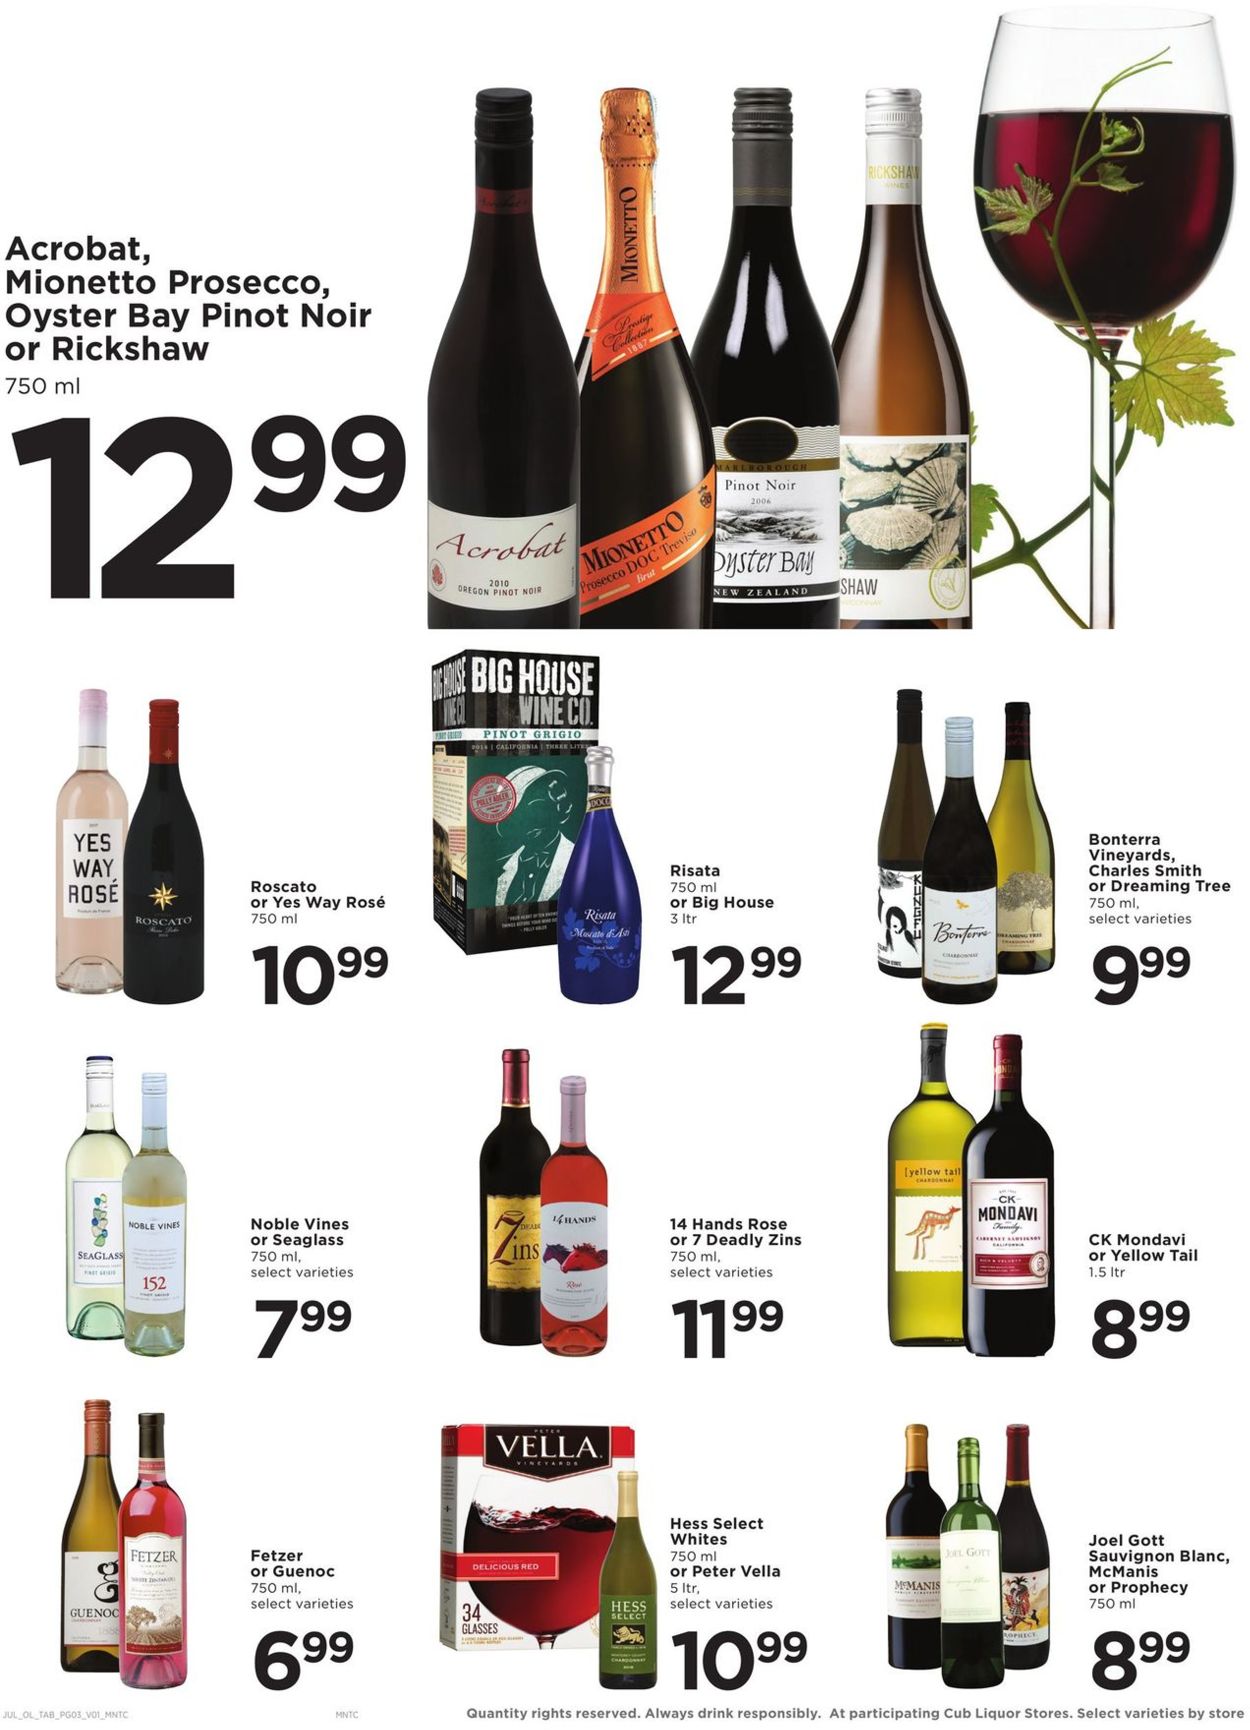 Catalogue Cub Foods from 06/27/2019